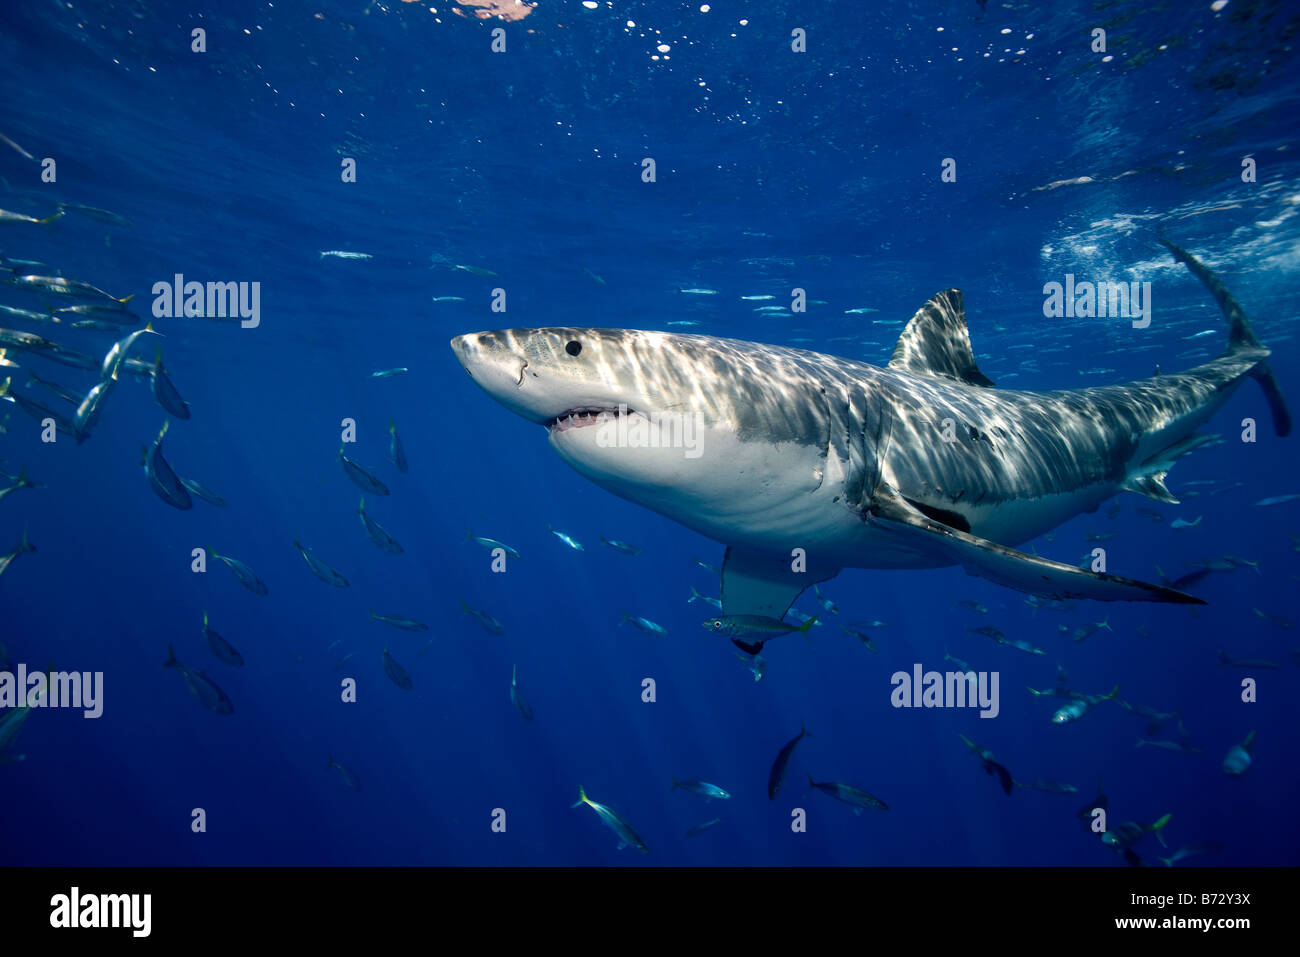 Great White Shark (Carcharodon Carcharias), Guadalupe Island, Mexico. Stock Photo